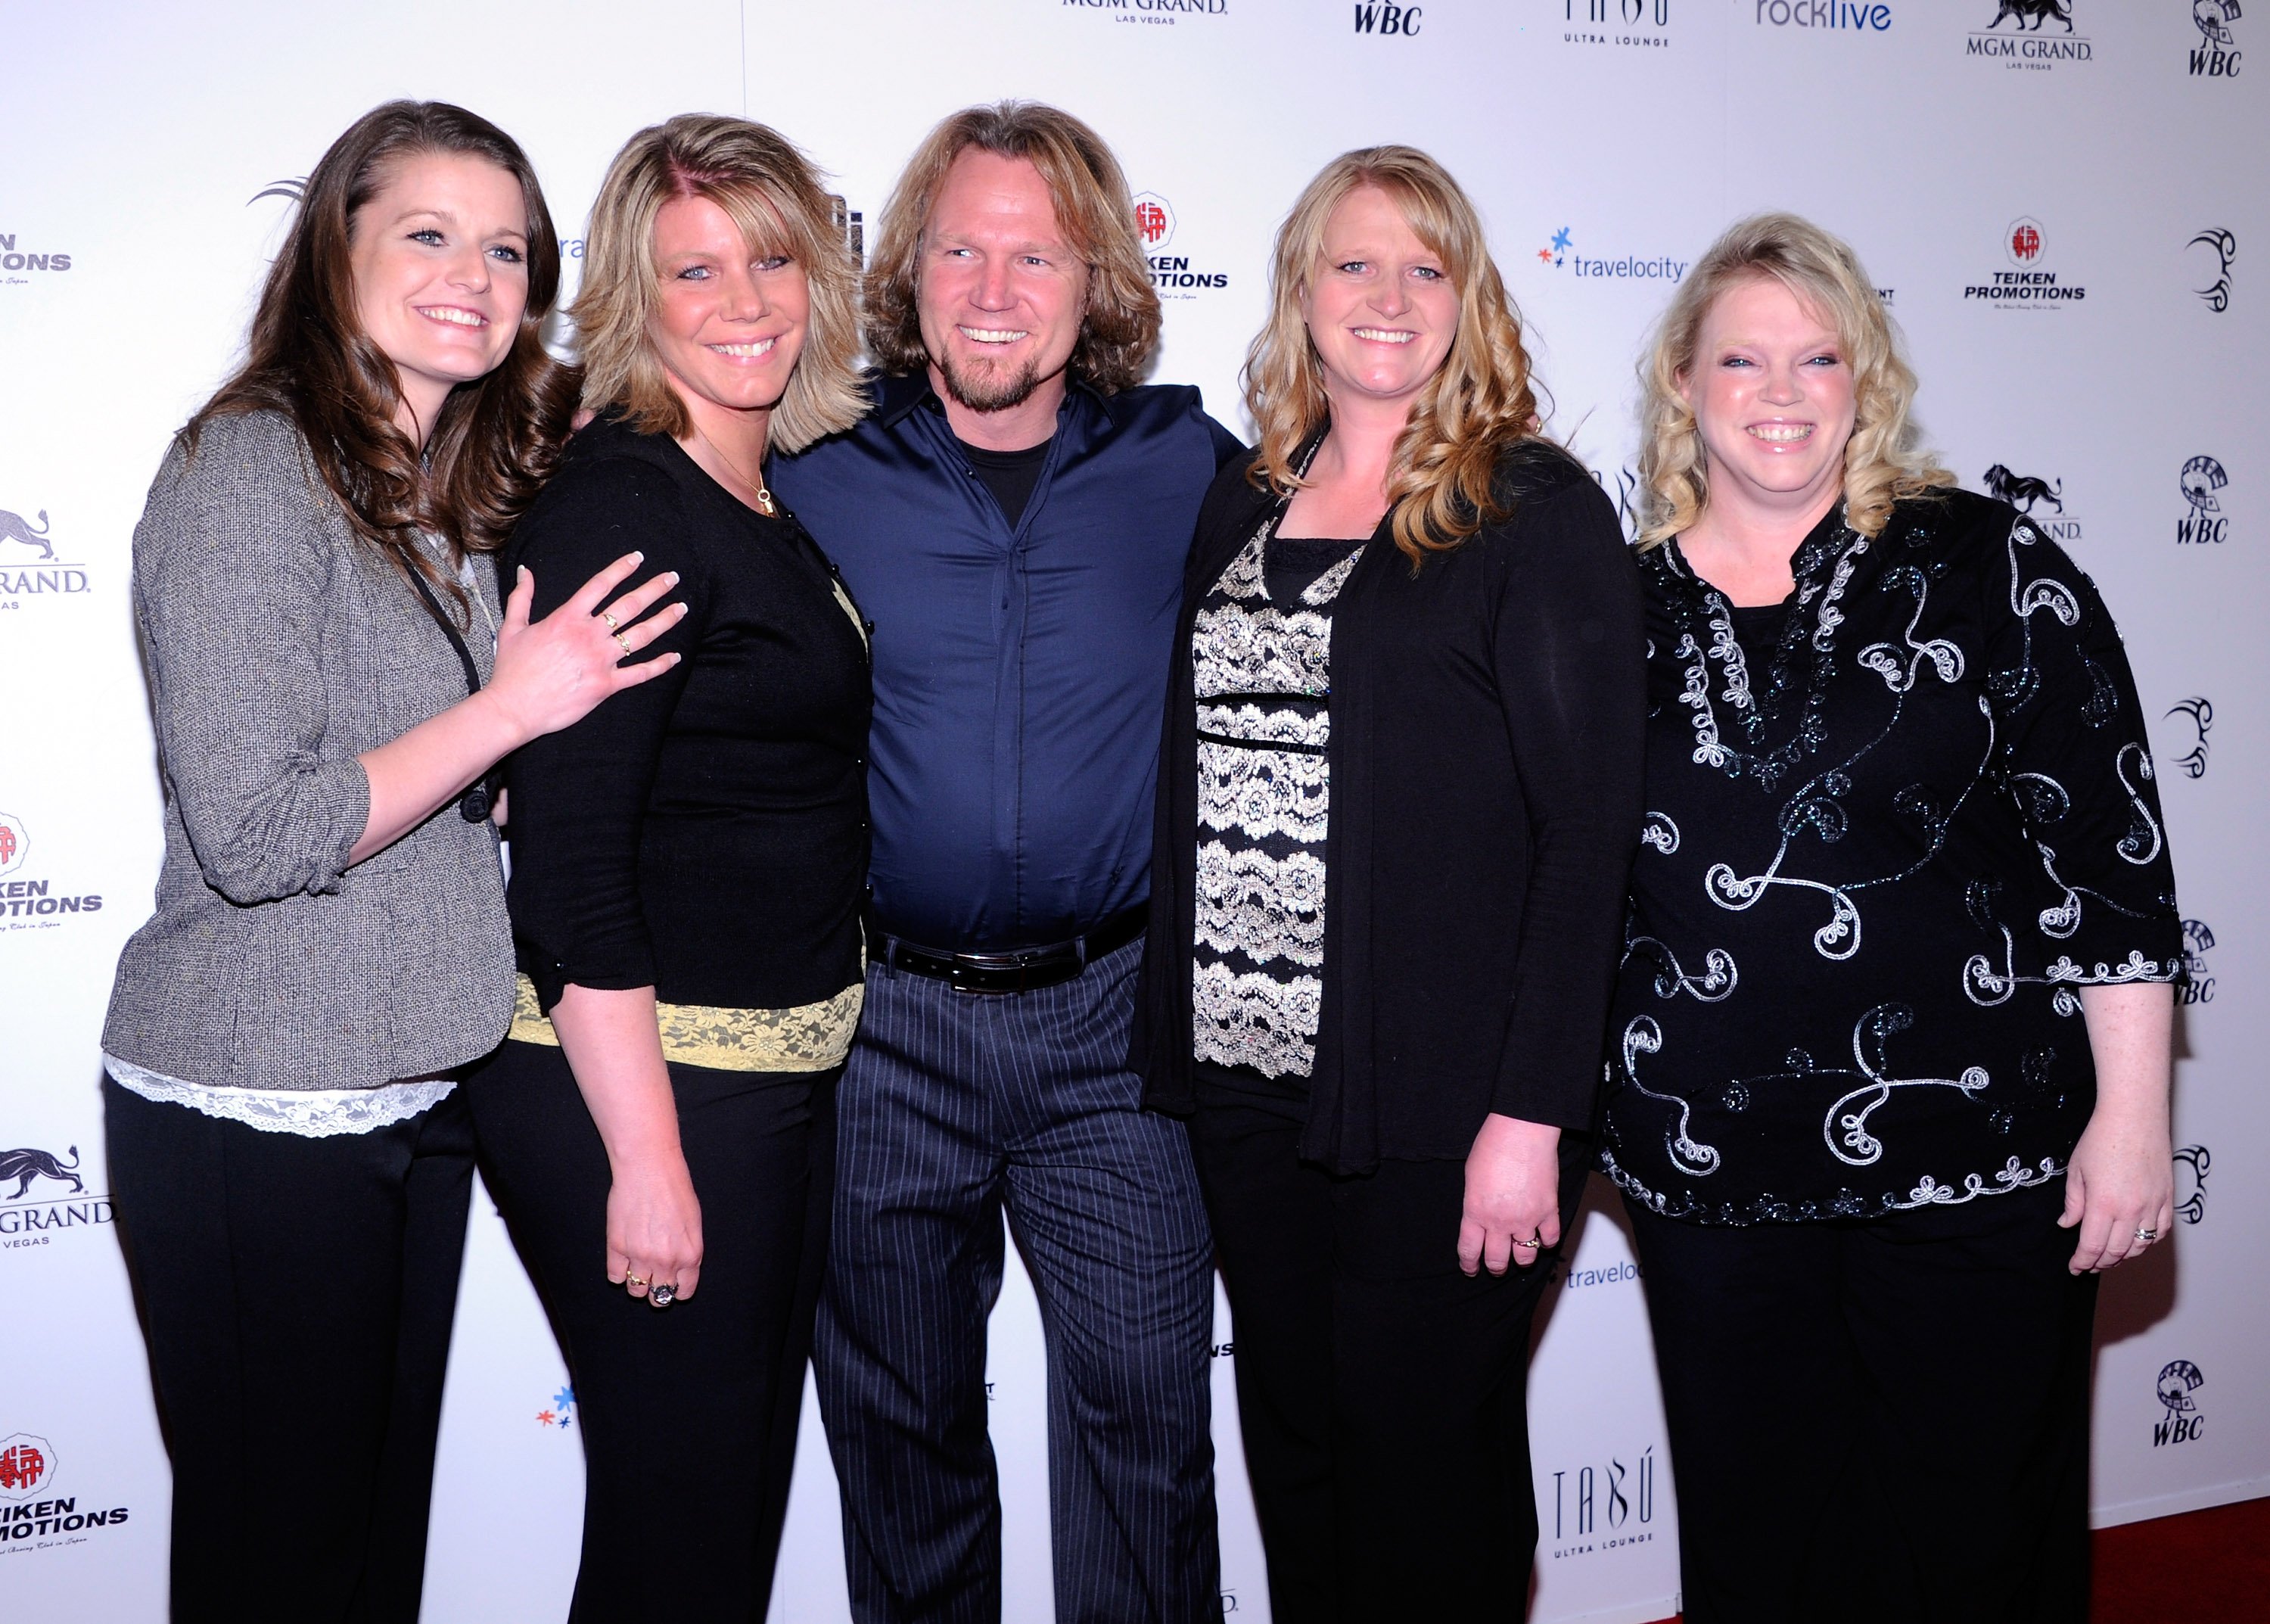 Robyn Brown, Meri Brown, Kody Brown, Christine Brown and Janelle Brown of 'Sister Wives' fame attend a show at the Hollywood Theatre in Las Vegas